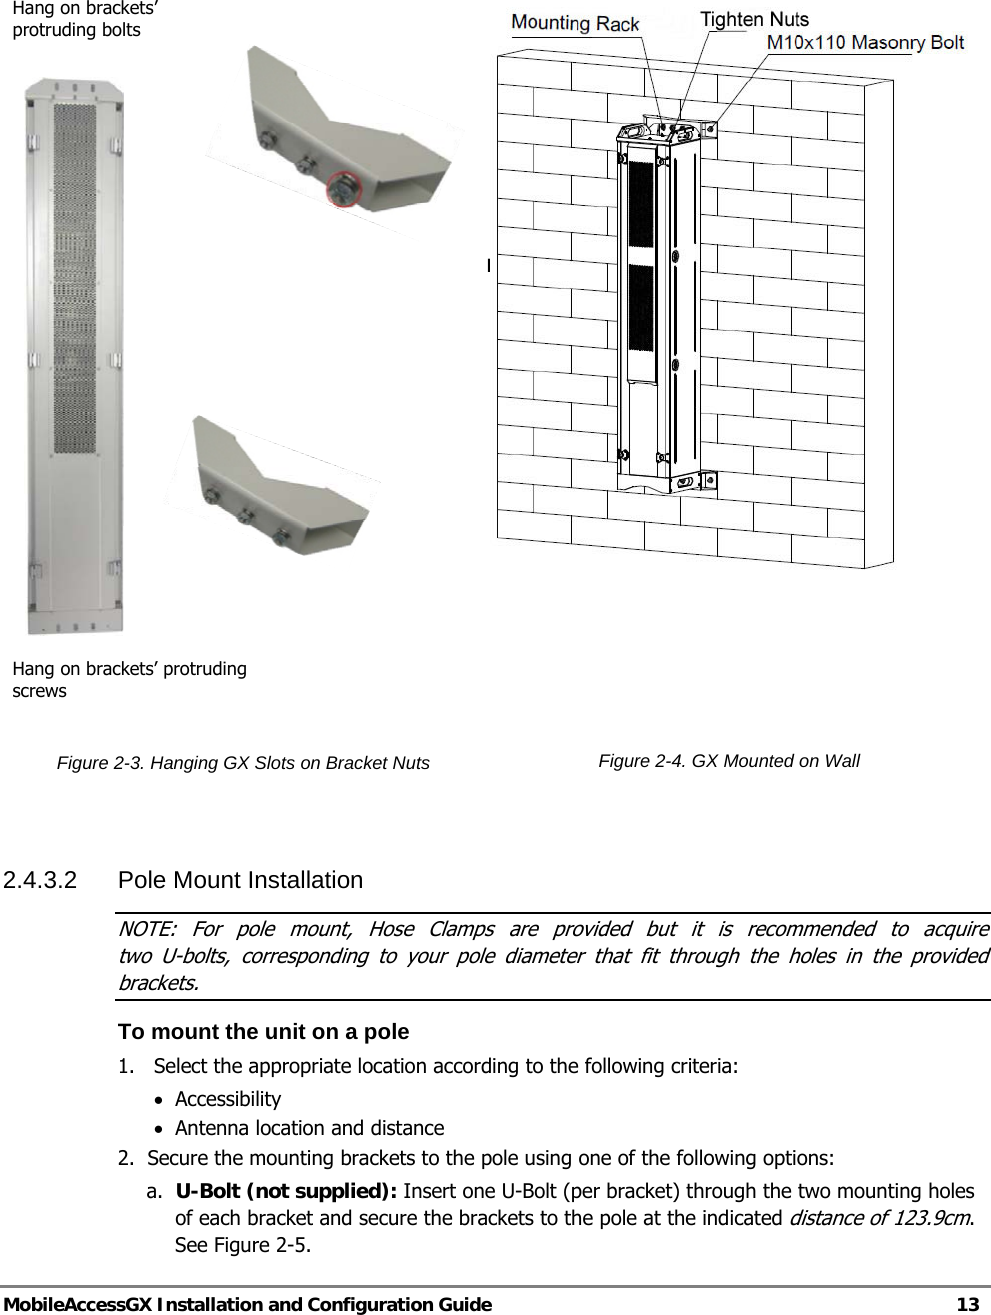   MobileAccessGX Installation and Configuration Guide   13         Figure 2-3. Hanging GX Slots on Bracket Nuts      Figure 2-4. GX Mounted on Wall   2.4.3.2 Pole Mount Installation NOTE: For pole mount, Hose Clamps are provided but it is recommended to acquire  two U-bolts, corresponding to your pole diameter that fit through the holes in the provided brackets. To mount the unit on a pole 1.  Select the appropriate location according to the following criteria: • Accessibility   • Antenna location and distance 2.  Secure the mounting brackets to the pole using one of the following options: a. U-Bolt (not supplied): Insert one U-Bolt (per bracket) through the two mounting holes of each bracket and secure the brackets to the pole at the indicated distance of 123.9cm. See Figure 2-5. Hang on brackets’ protruding bolts Hang on brackets’ protruding screws PULL DOWNFIRMLY